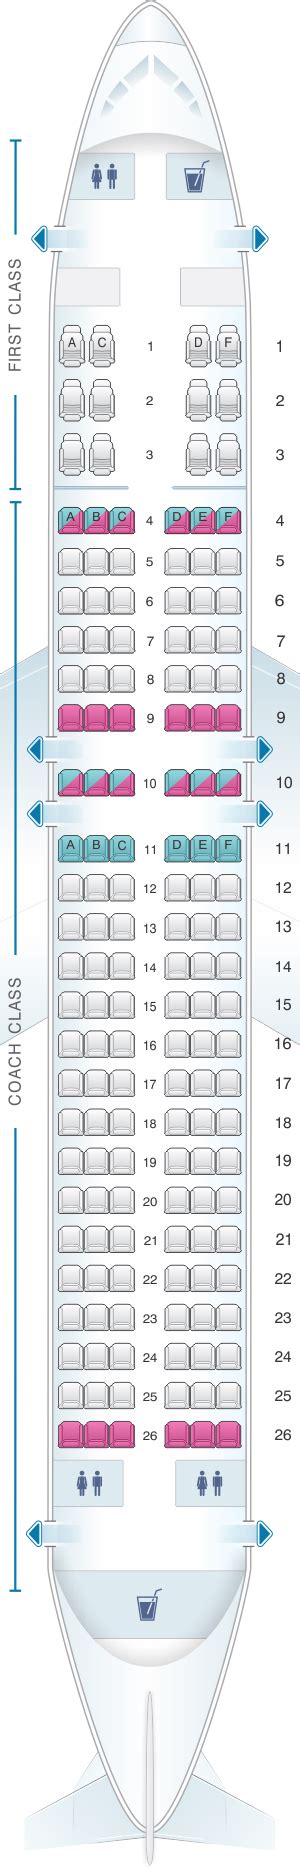 Seat Map Us Airways Airbus A320